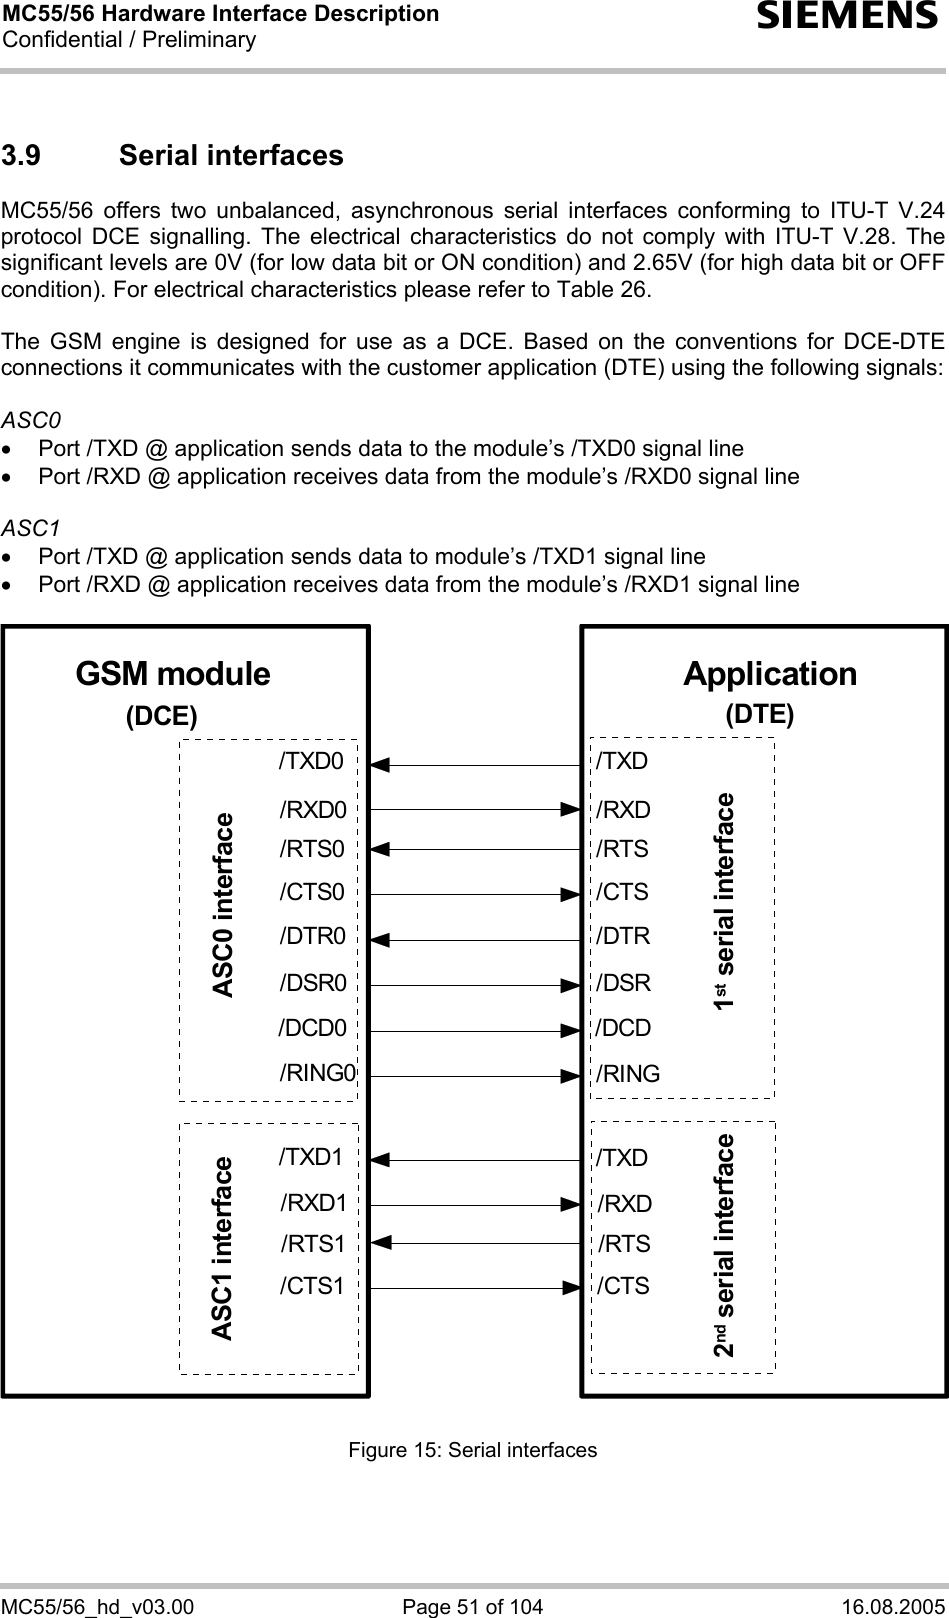 MC55/56 Hardware Interface Description Confidential / Preliminary s MC55/56_hd_v03.00  Page 51 of 104  16.08.2005 3.9 Serial interfaces MC55/56 offers two unbalanced, asynchronous serial interfaces conforming to ITU-T V.24 protocol DCE signalling. The electrical characteristics do not comply with ITU-T V.28. The significant levels are 0V (for low data bit or ON condition) and 2.65V (for high data bit or OFF condition). For electrical characteristics please refer to Table 26.  The GSM engine is designed for use as a DCE. Based on the conventions for DCE-DTE connections it communicates with the customer application (DTE) using the following signals:  ASC0 •  Port /TXD @ application sends data to the module’s /TXD0 signal line •  Port /RXD @ application receives data from the module’s /RXD0 signal line  ASC1 •  Port /TXD @ application sends data to module’s /TXD1 signal line •  Port /RXD @ application receives data from the module’s /RXD1 signal line  GSM module Application/TXD/RXD/RTS/CTS/RING/DCD/DSR/DTR/TXD/RXD/RTS/CTS1st serial interface(DTE)(DCE)2nd serial interfaceASC0 interfaceASC1 interface/TXD0/RXD0/RTS0/CTS0/RING0/DCD0/DSR0/DTR0/TXD1/RXD1/RTS1/CTS1 Figure 15: Serial interfaces   